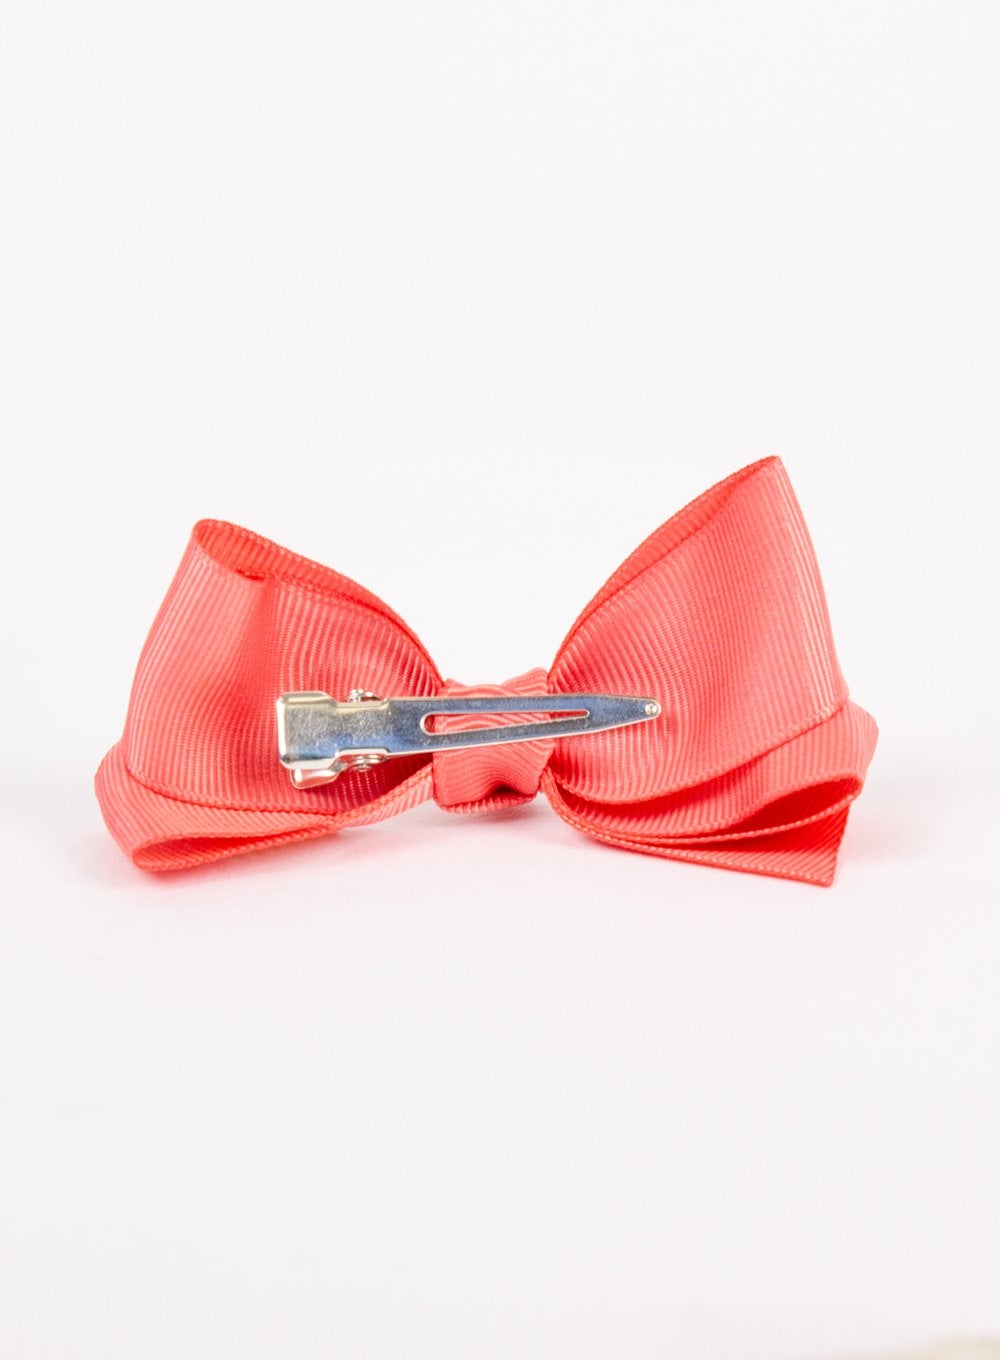 Lily Rose Clip Large Bow Hair Clip in Watermelon - Trotters Childrenswear